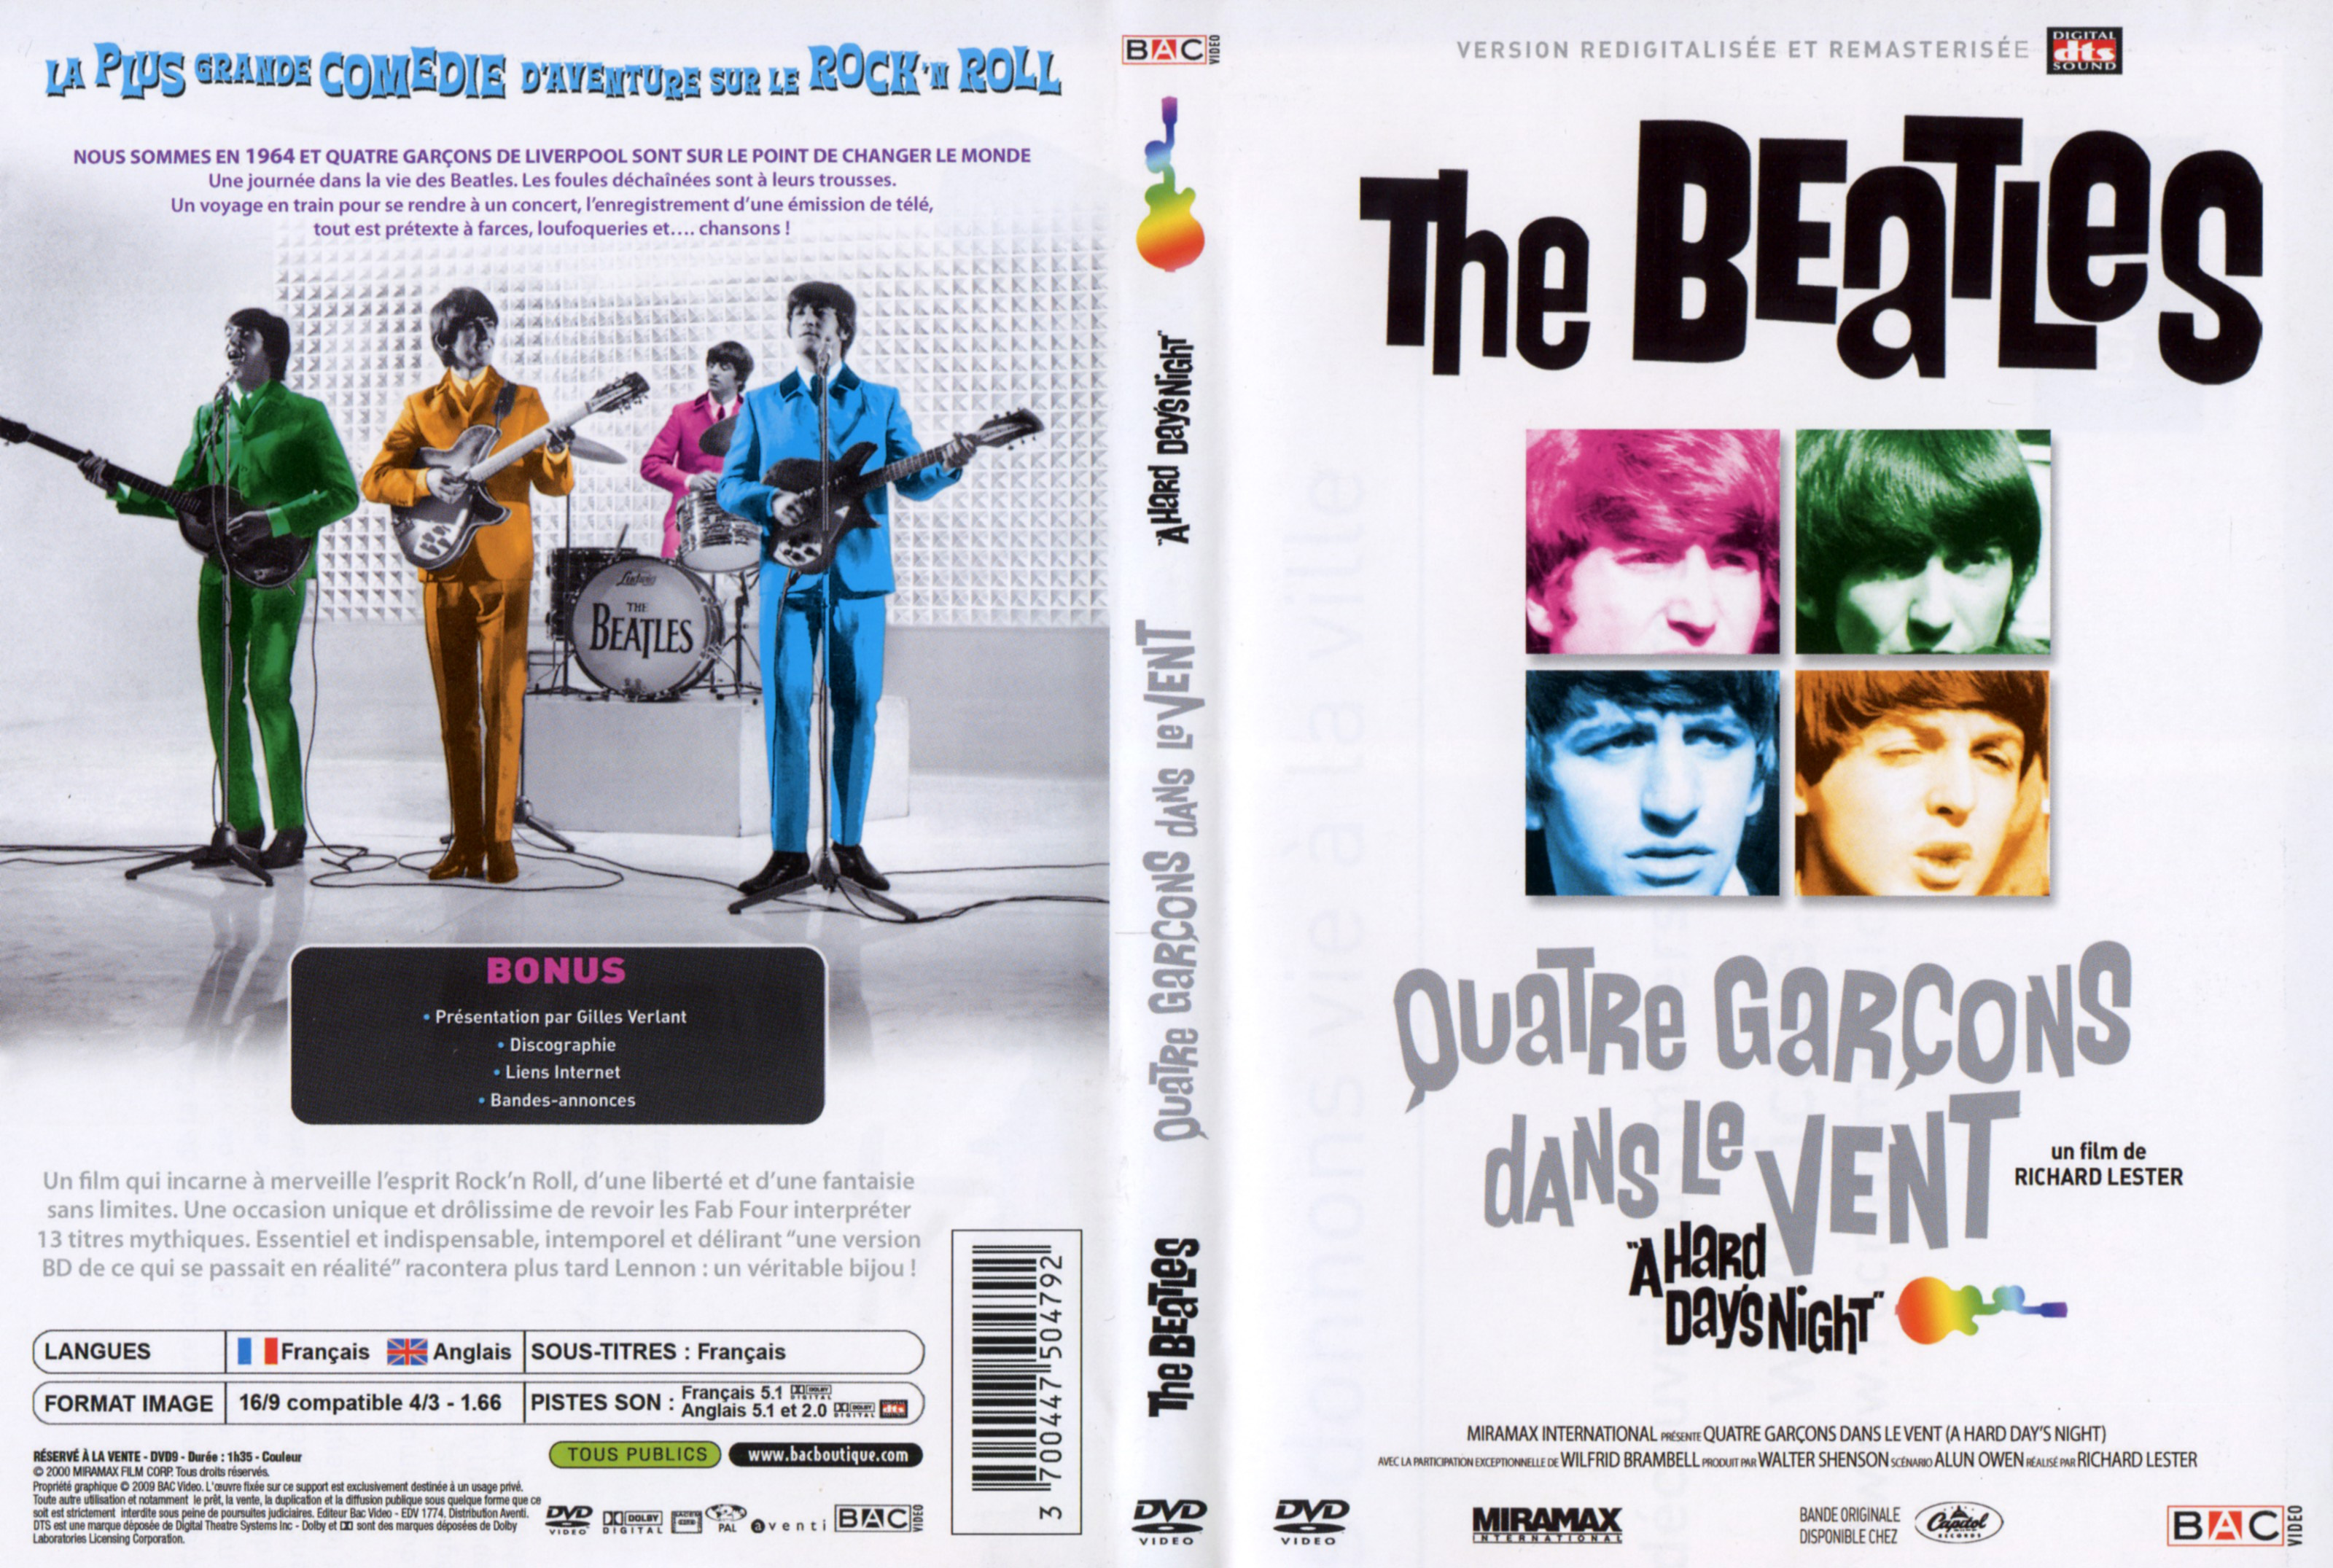 Jaquette DVD The Beatles A hard day s night v2